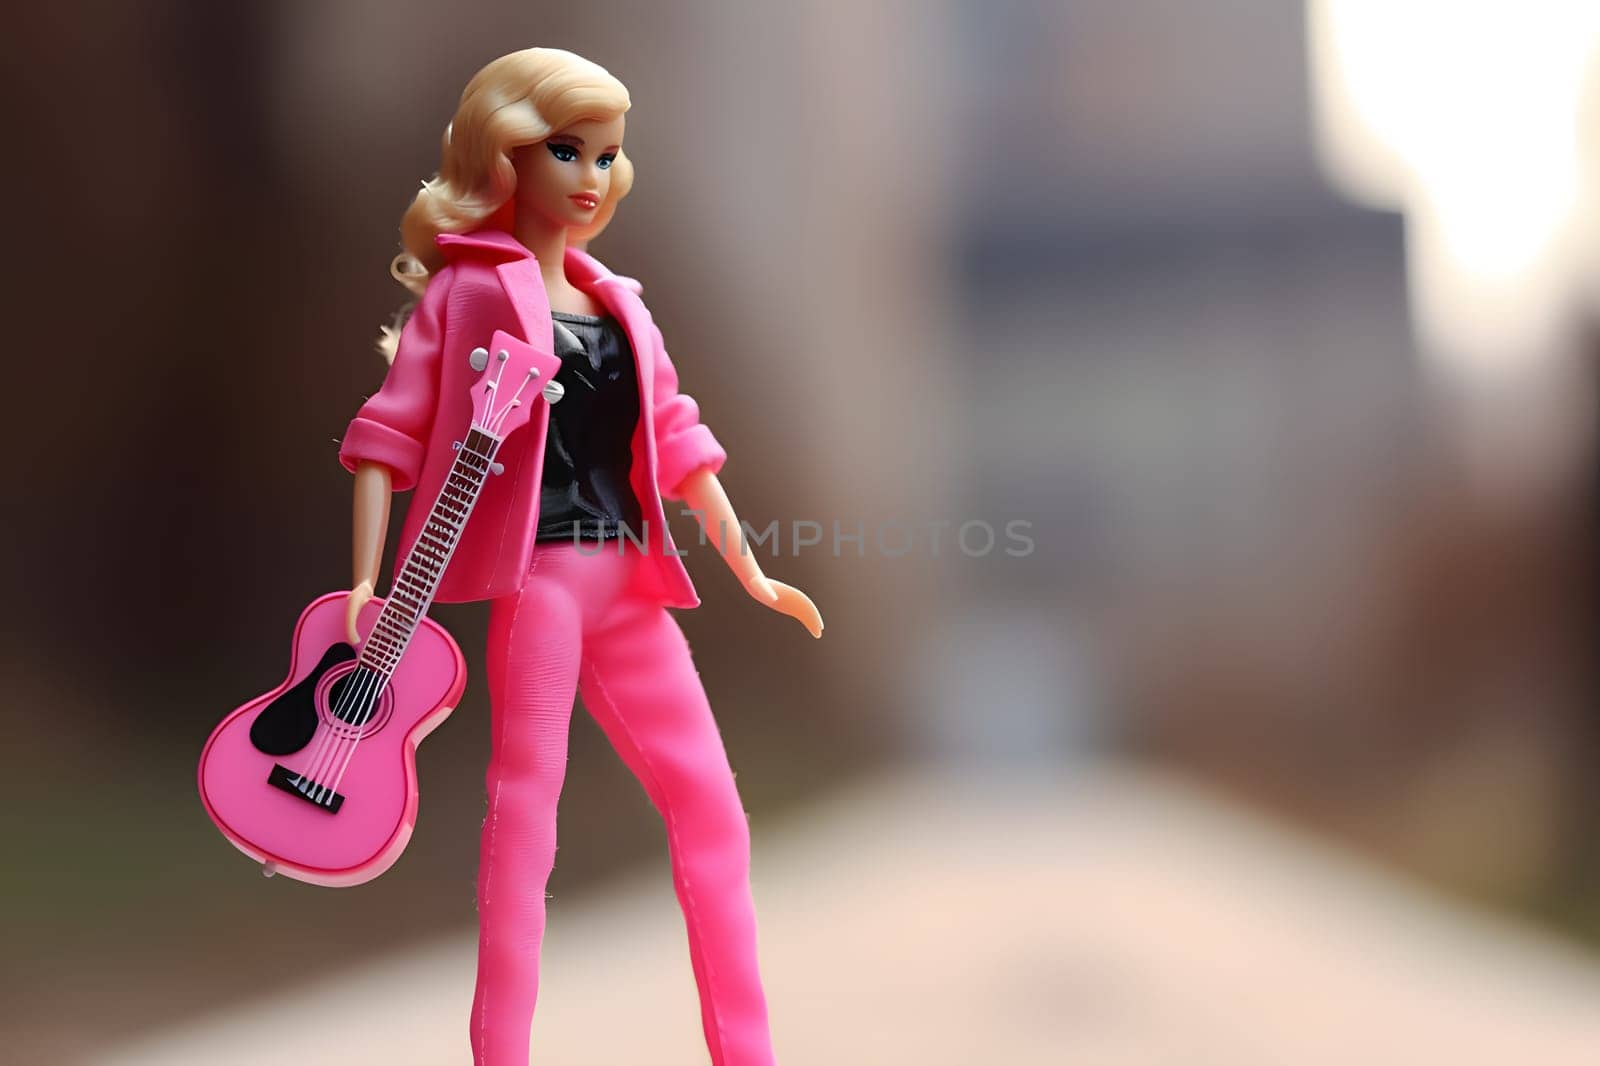 Barbie doll looks fabulous in her pink outfit, holding a guitar on stage, ready to captivate the audience with her music.